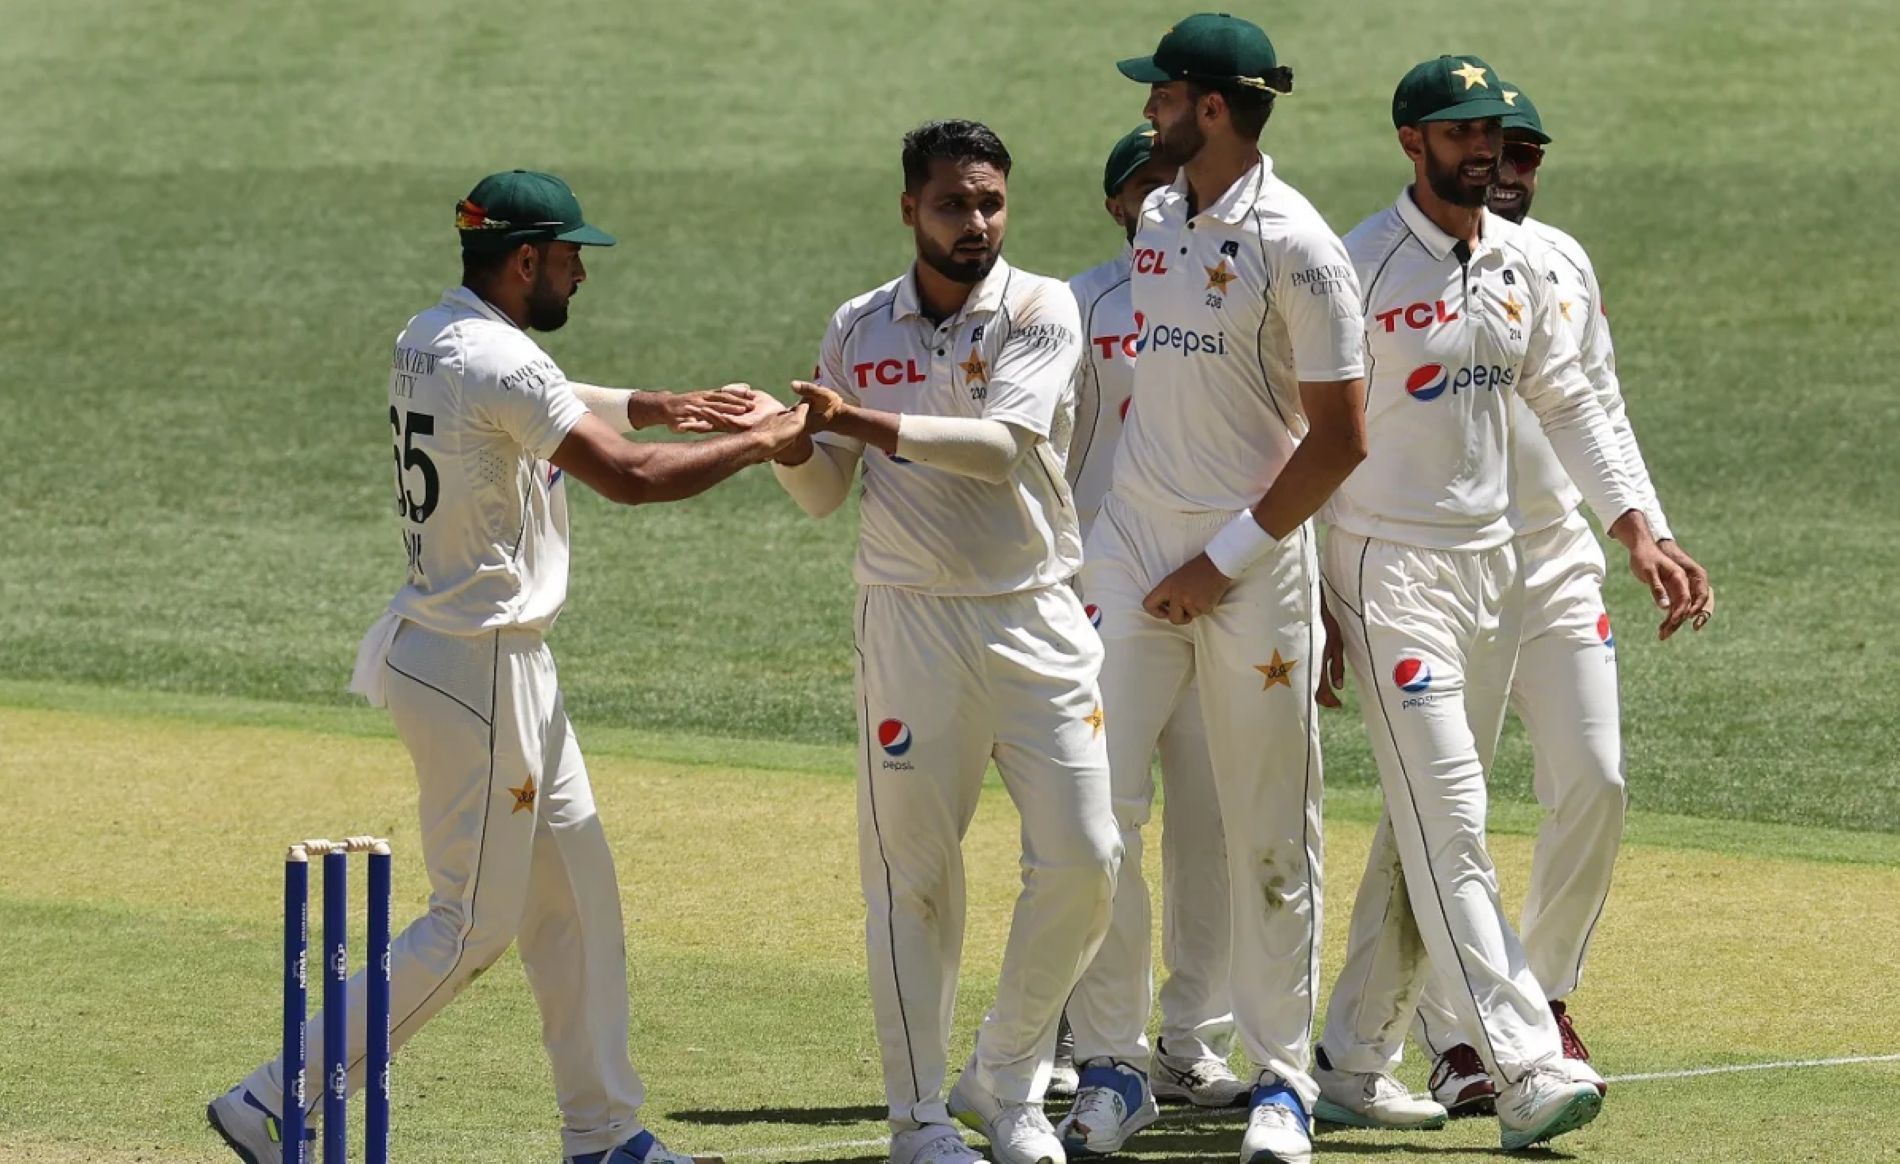 Pakistan bowlers had a long and hard toil on Day 1 of the opening Test